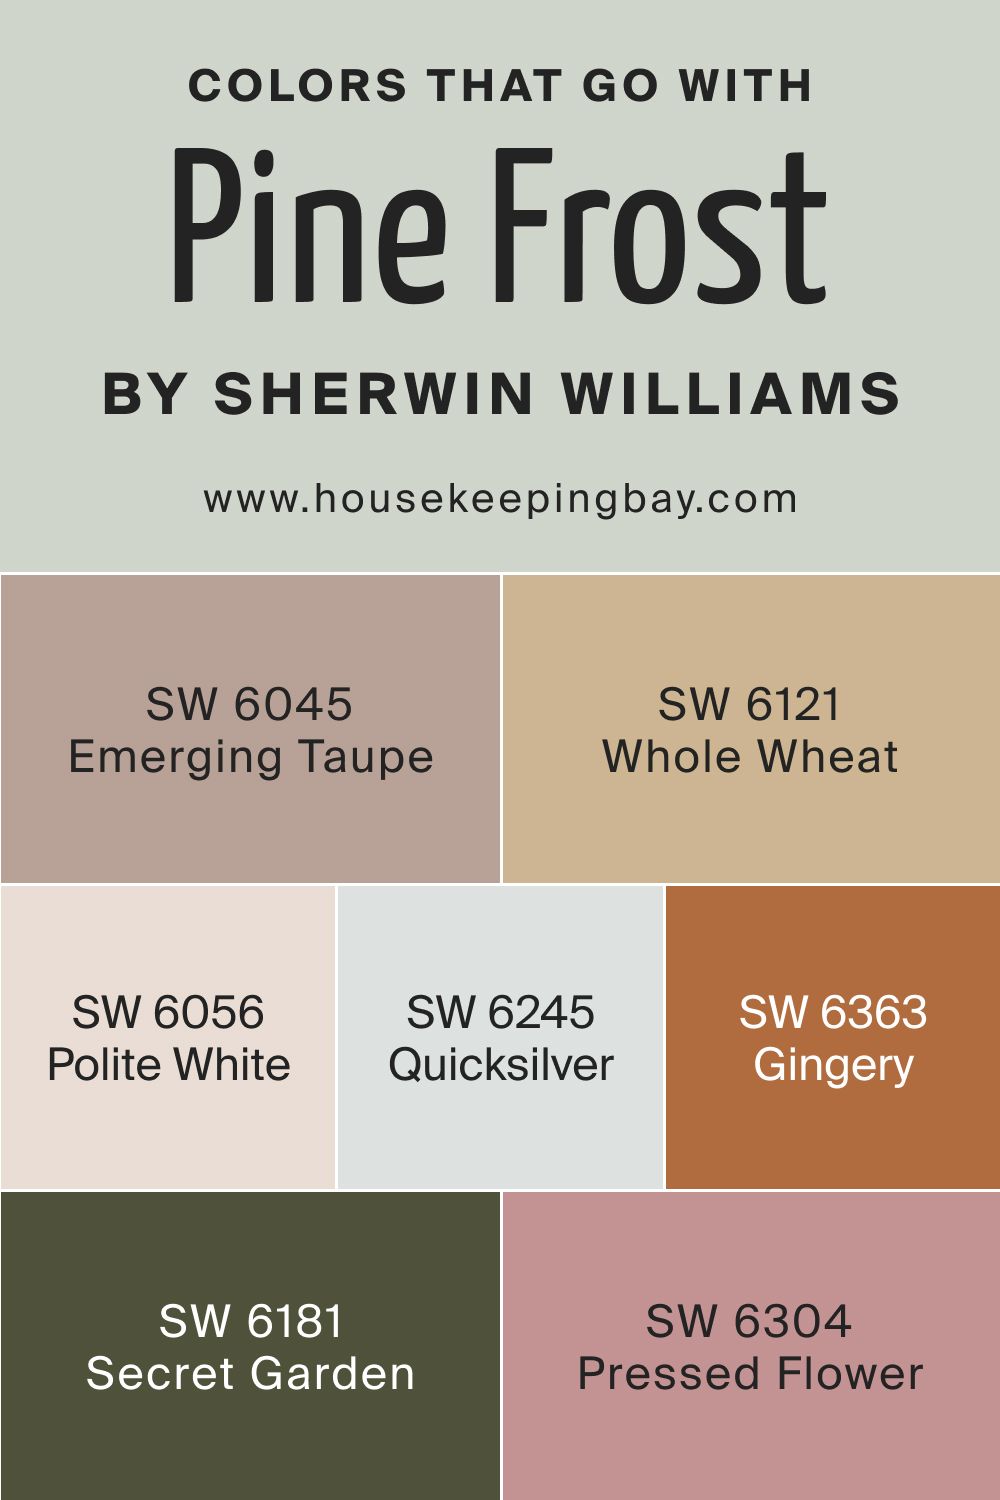 Colors that goes with SW 9656 Pine Frost by Sherwin Williams